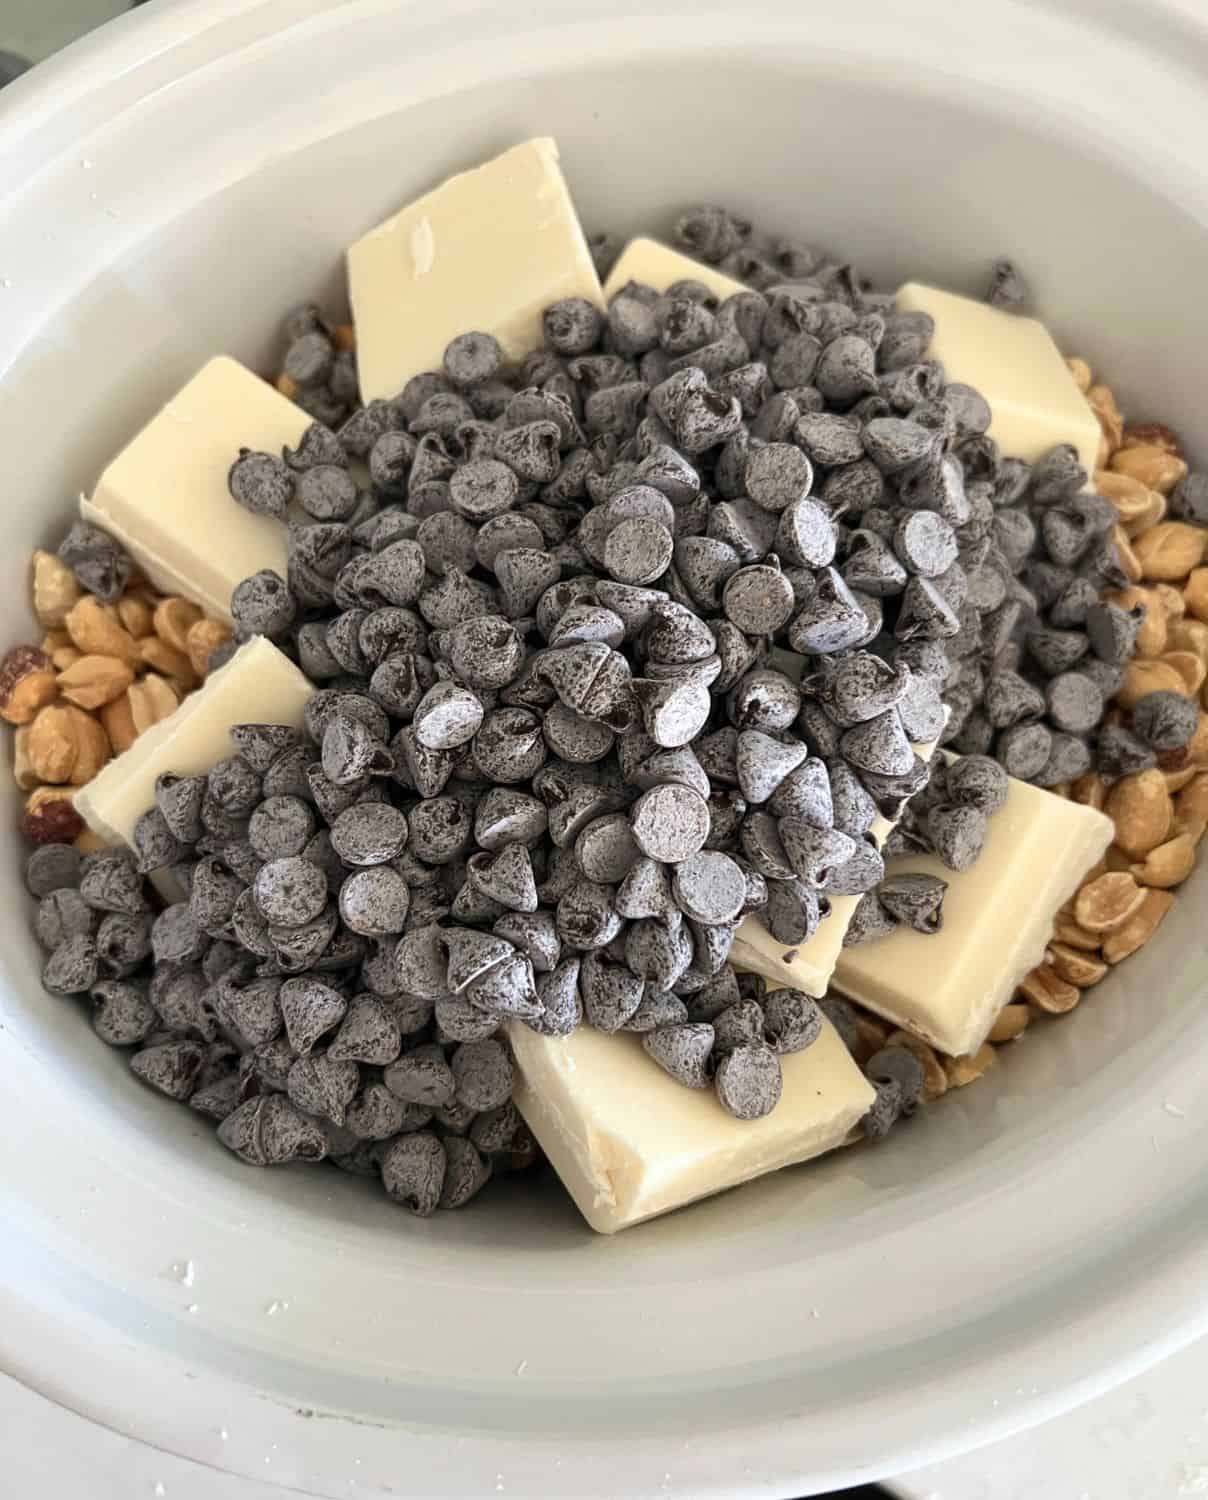 Peanuts and chocolate in a slow cooker. 